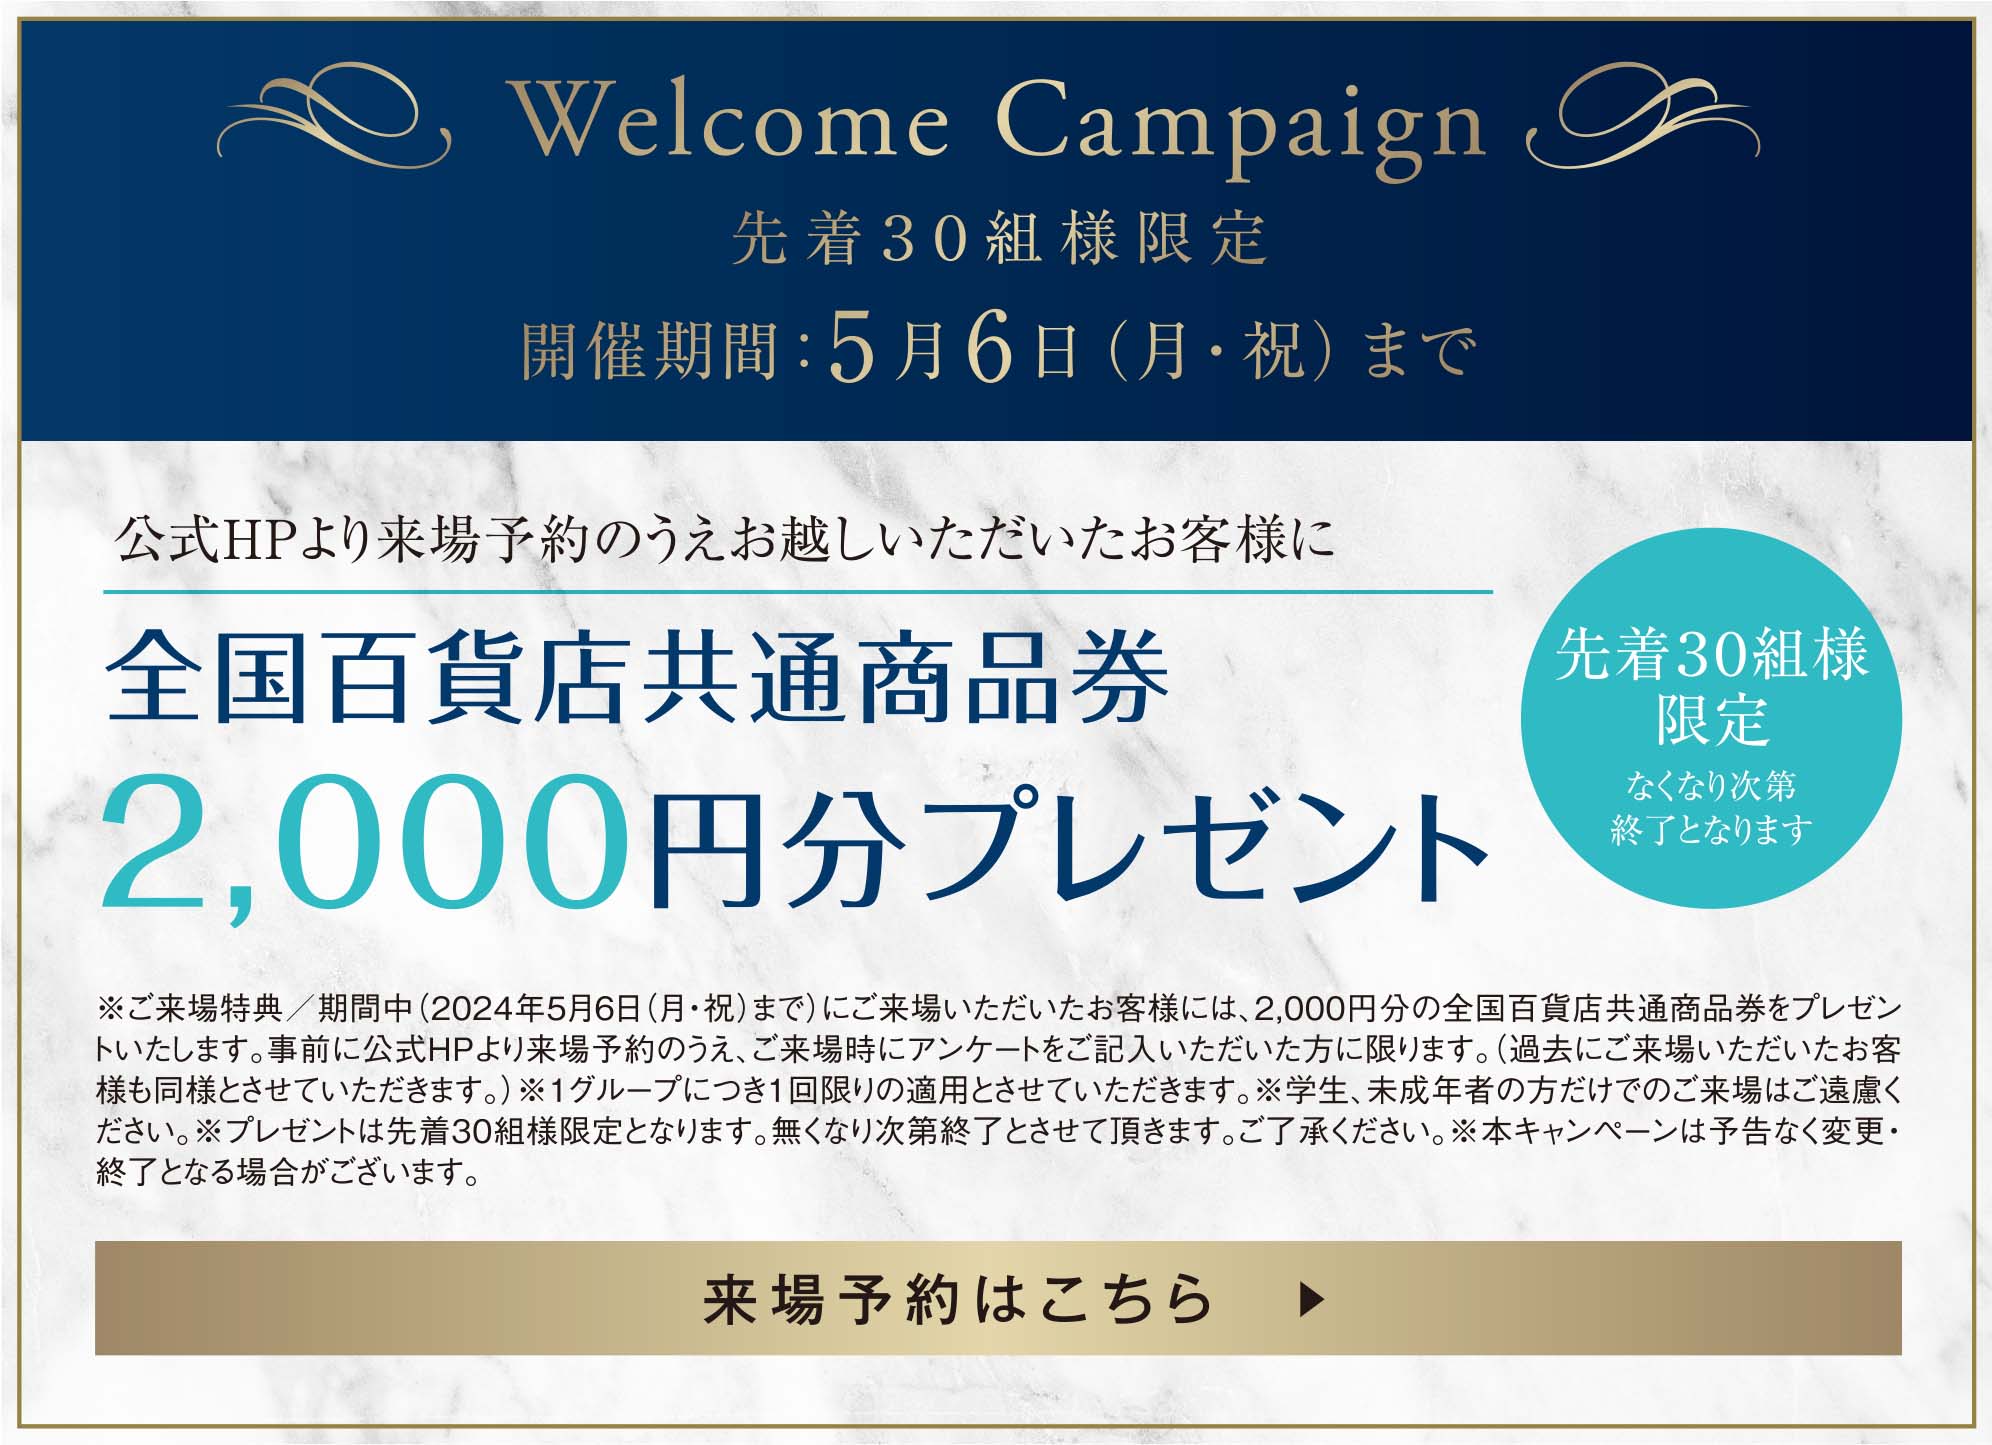 Welcome Campaign 先着30組様限定 開催期間：5月6日(月・祝)まで